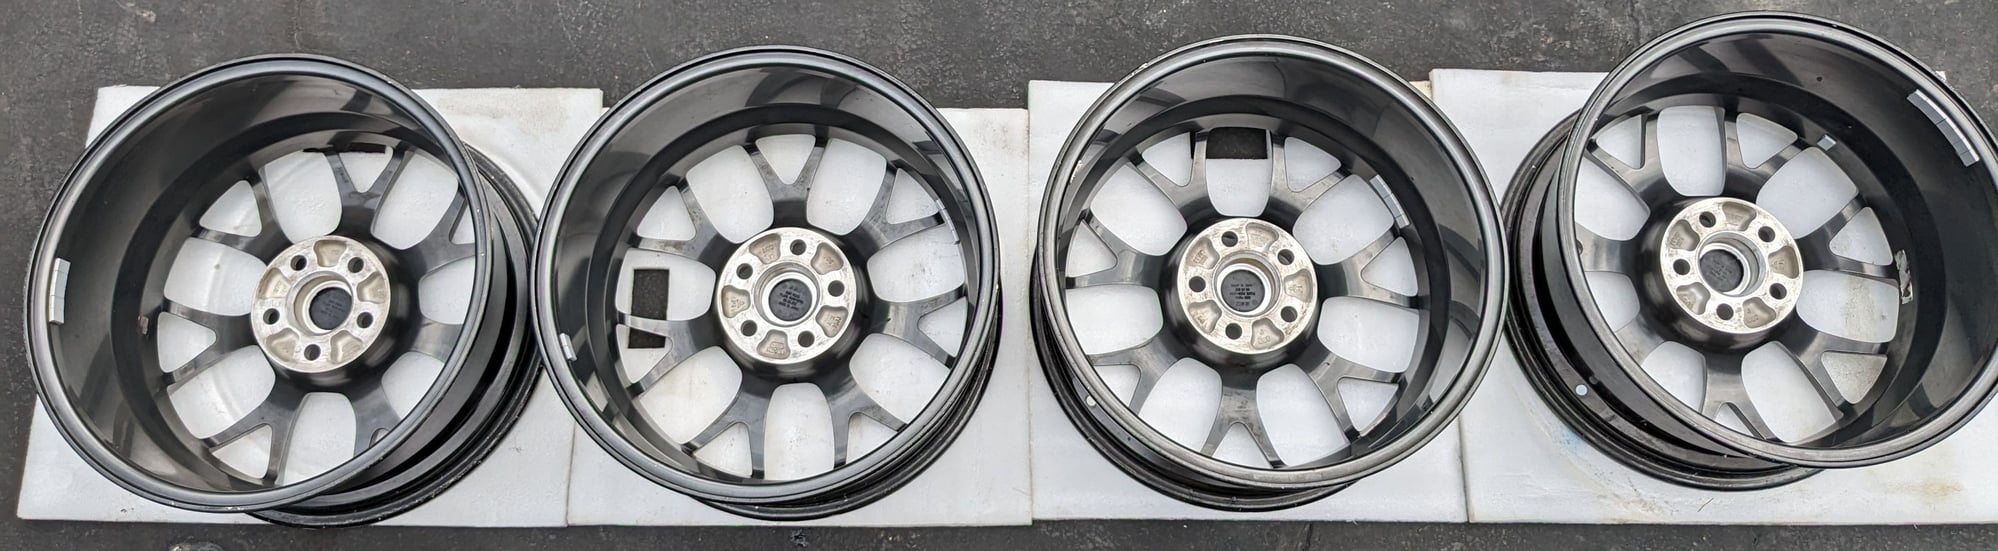 Wheels and Tires/Axles - Evo 10 BBS MR wheels 18x8.5 +38 - Used - 1993 to 1995 Mazda RX-7 - Roselle, IL 60172, United States